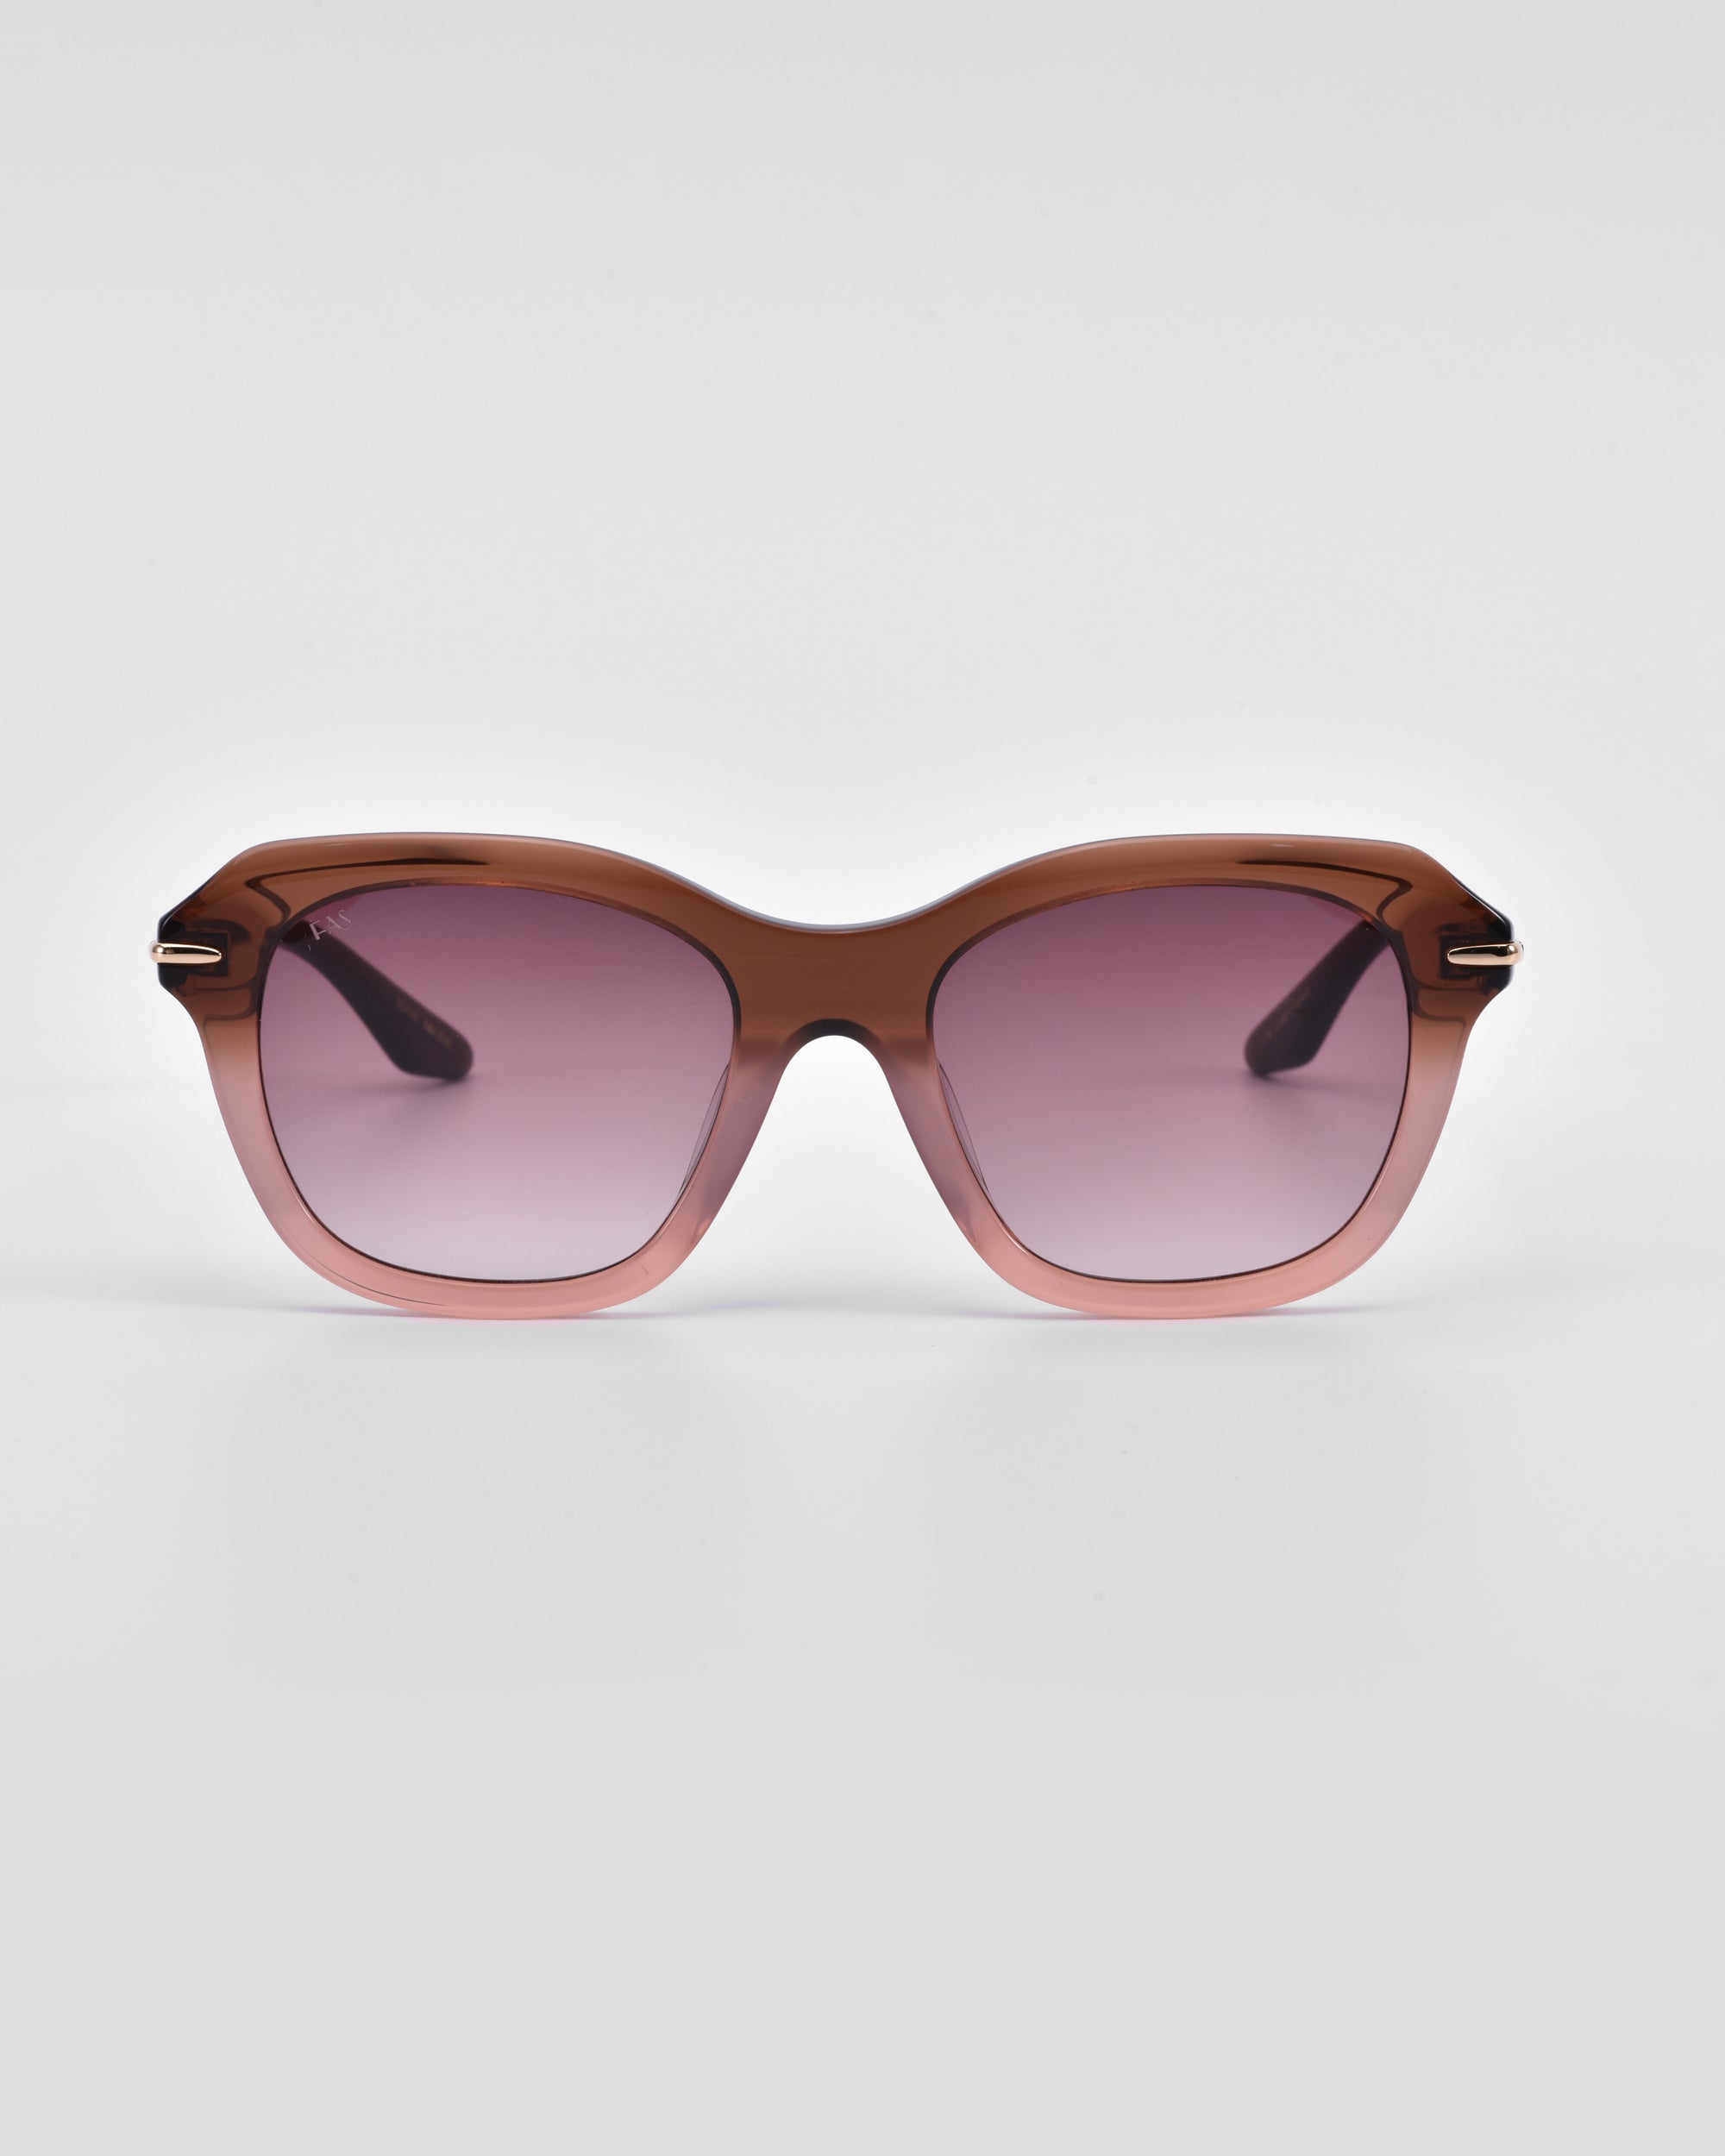 A pair of stylish, oversized cat-eye sunglasses with a gradient brown-pink frame and pink-tinted lenses. The arms of the glasses are black and slightly curved, featuring metallic accents near the hinges. The Helene by For Art's Sake® stands out against a plain white background.